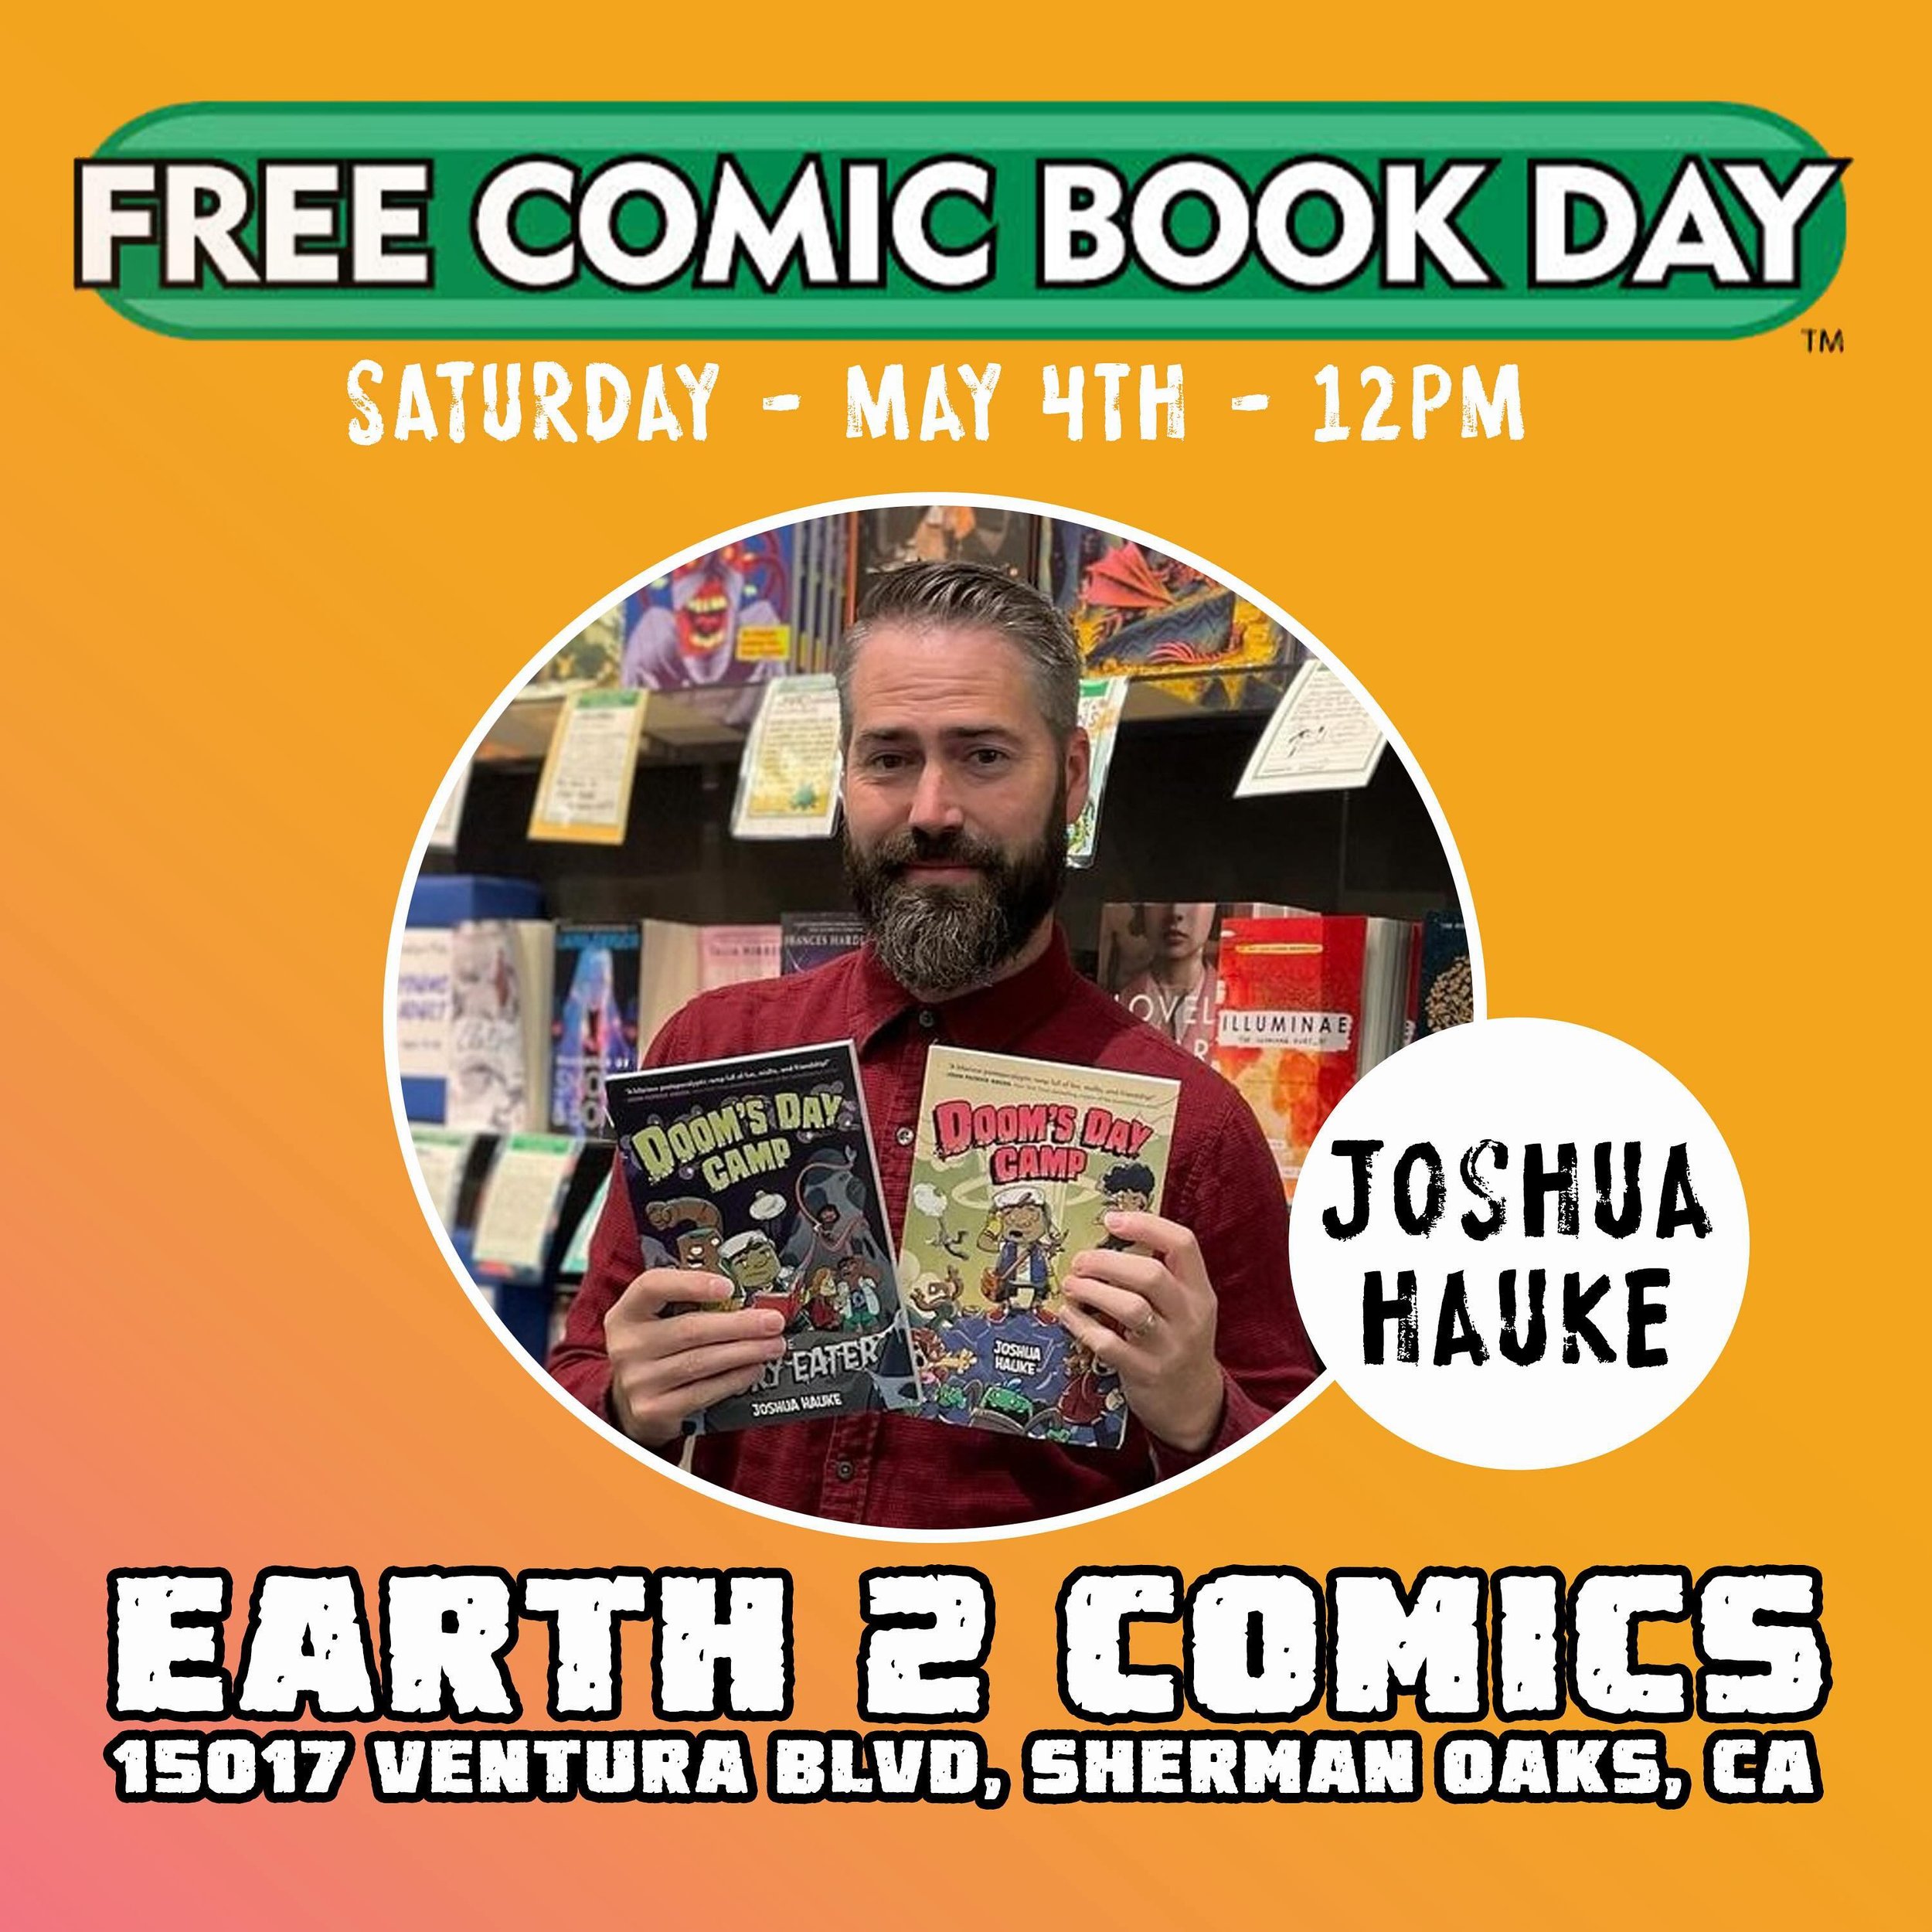 Sadly, one of my all time favorite comic shops @earth_2_comics, will be closing their doors soon. But, before they do they are going all out for their final free comic book day. Come down and see me, along with a few other special guest to help send 